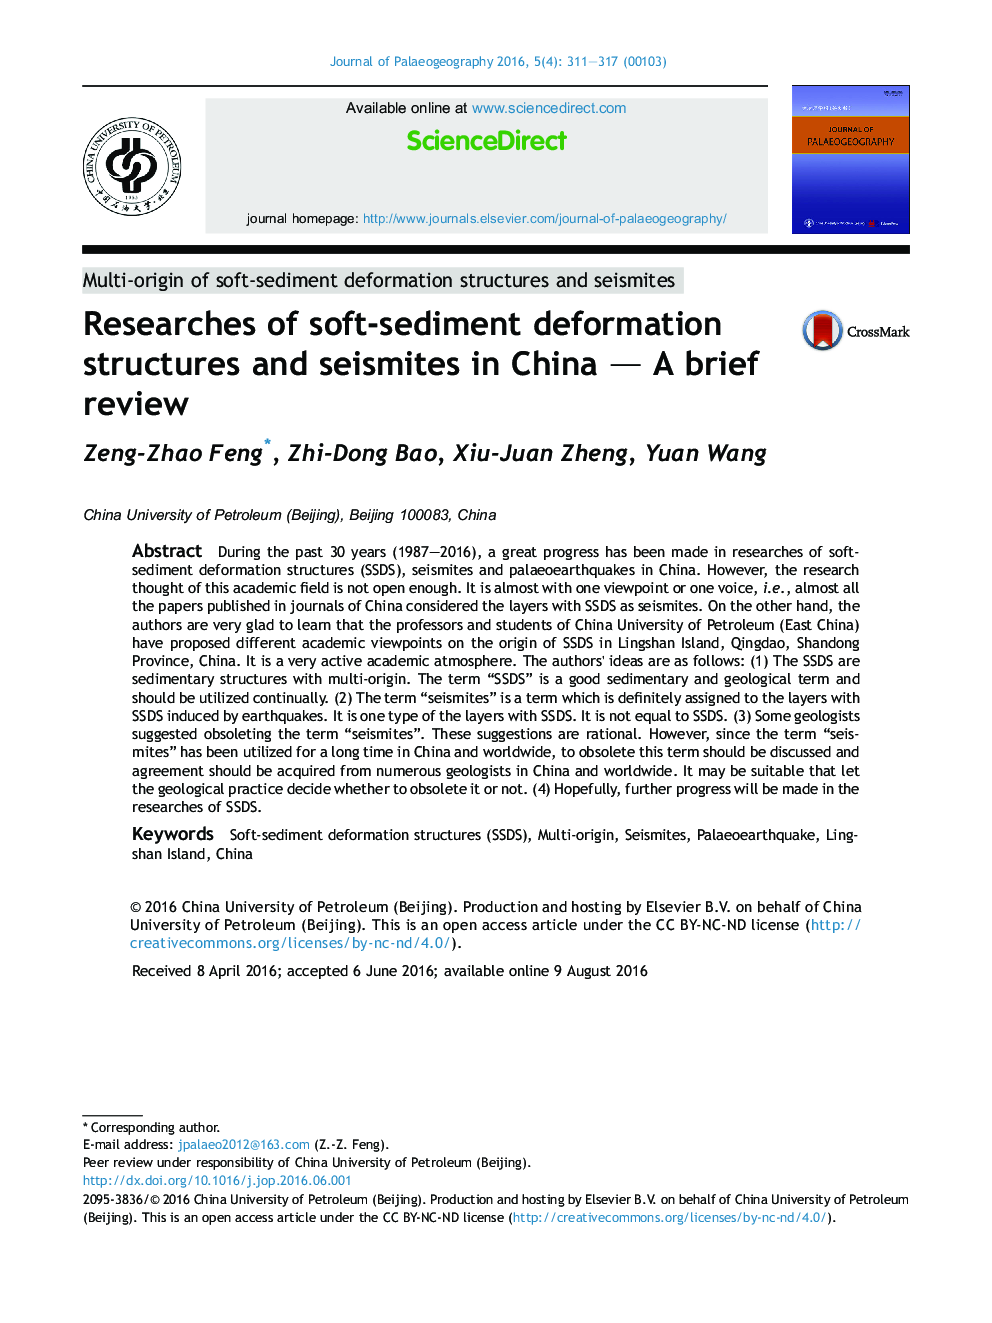 Researches of soft-sediment deformation structures and seismites in China — A brief review 